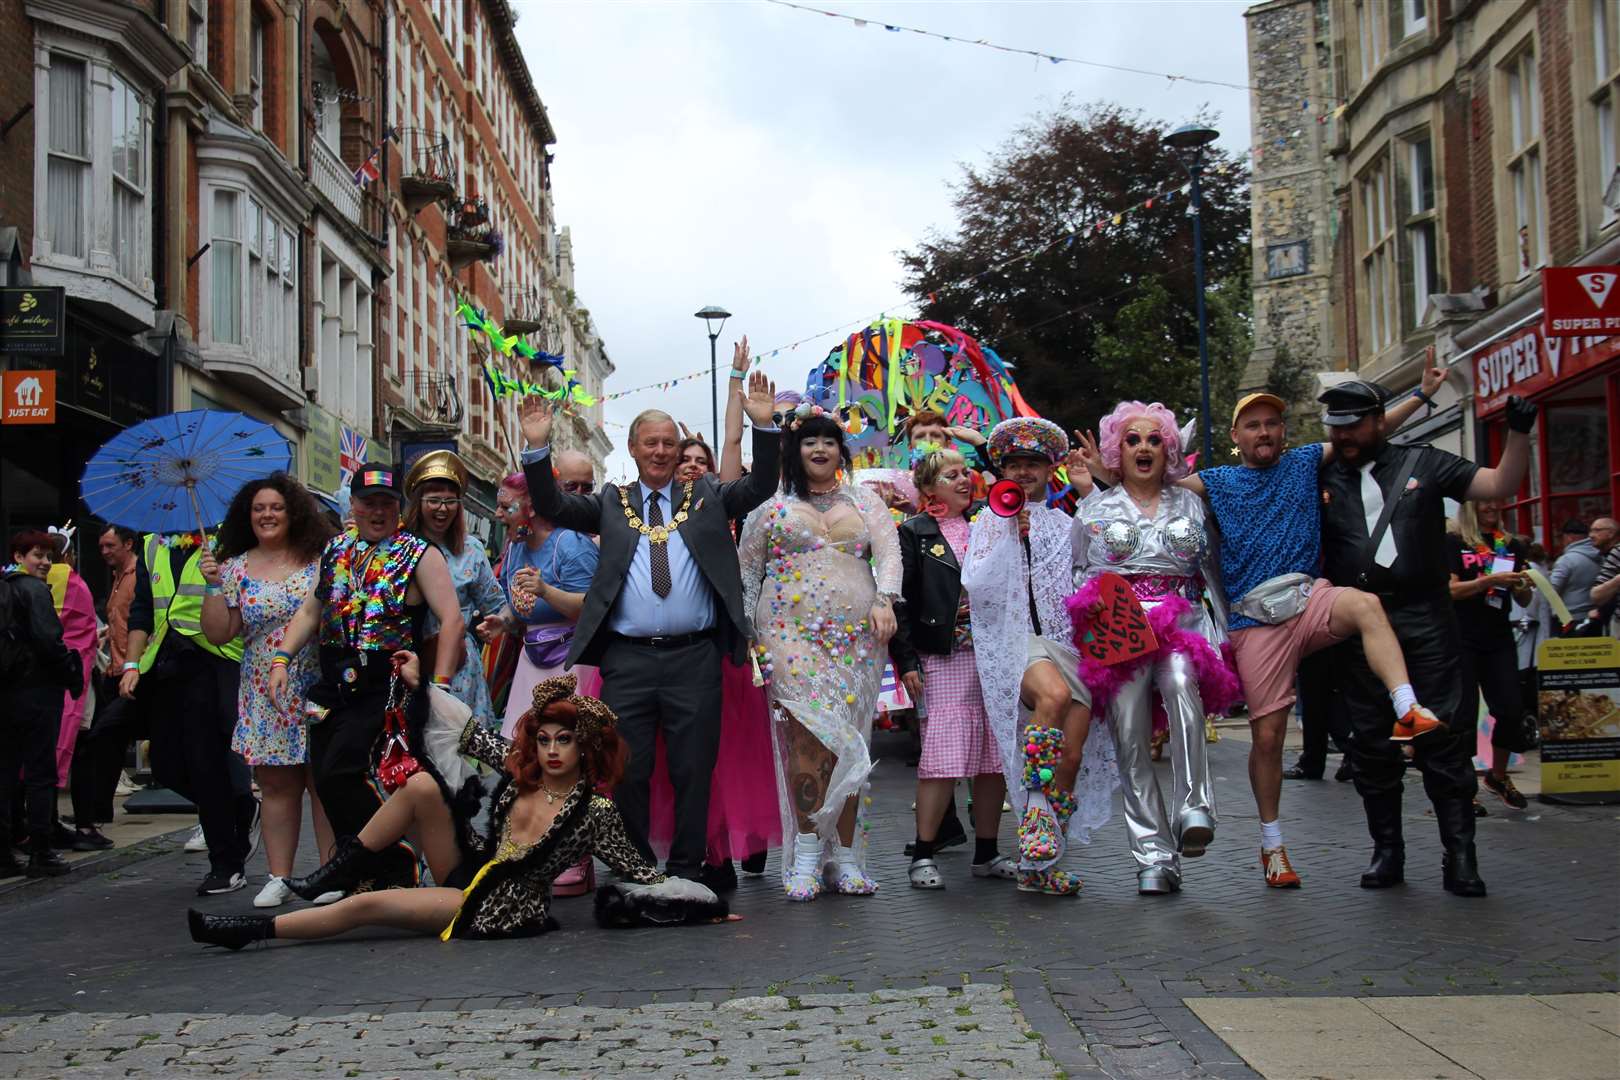 Revellers enjoying Dover Pride 2021. Picture: Photography with Evangeline